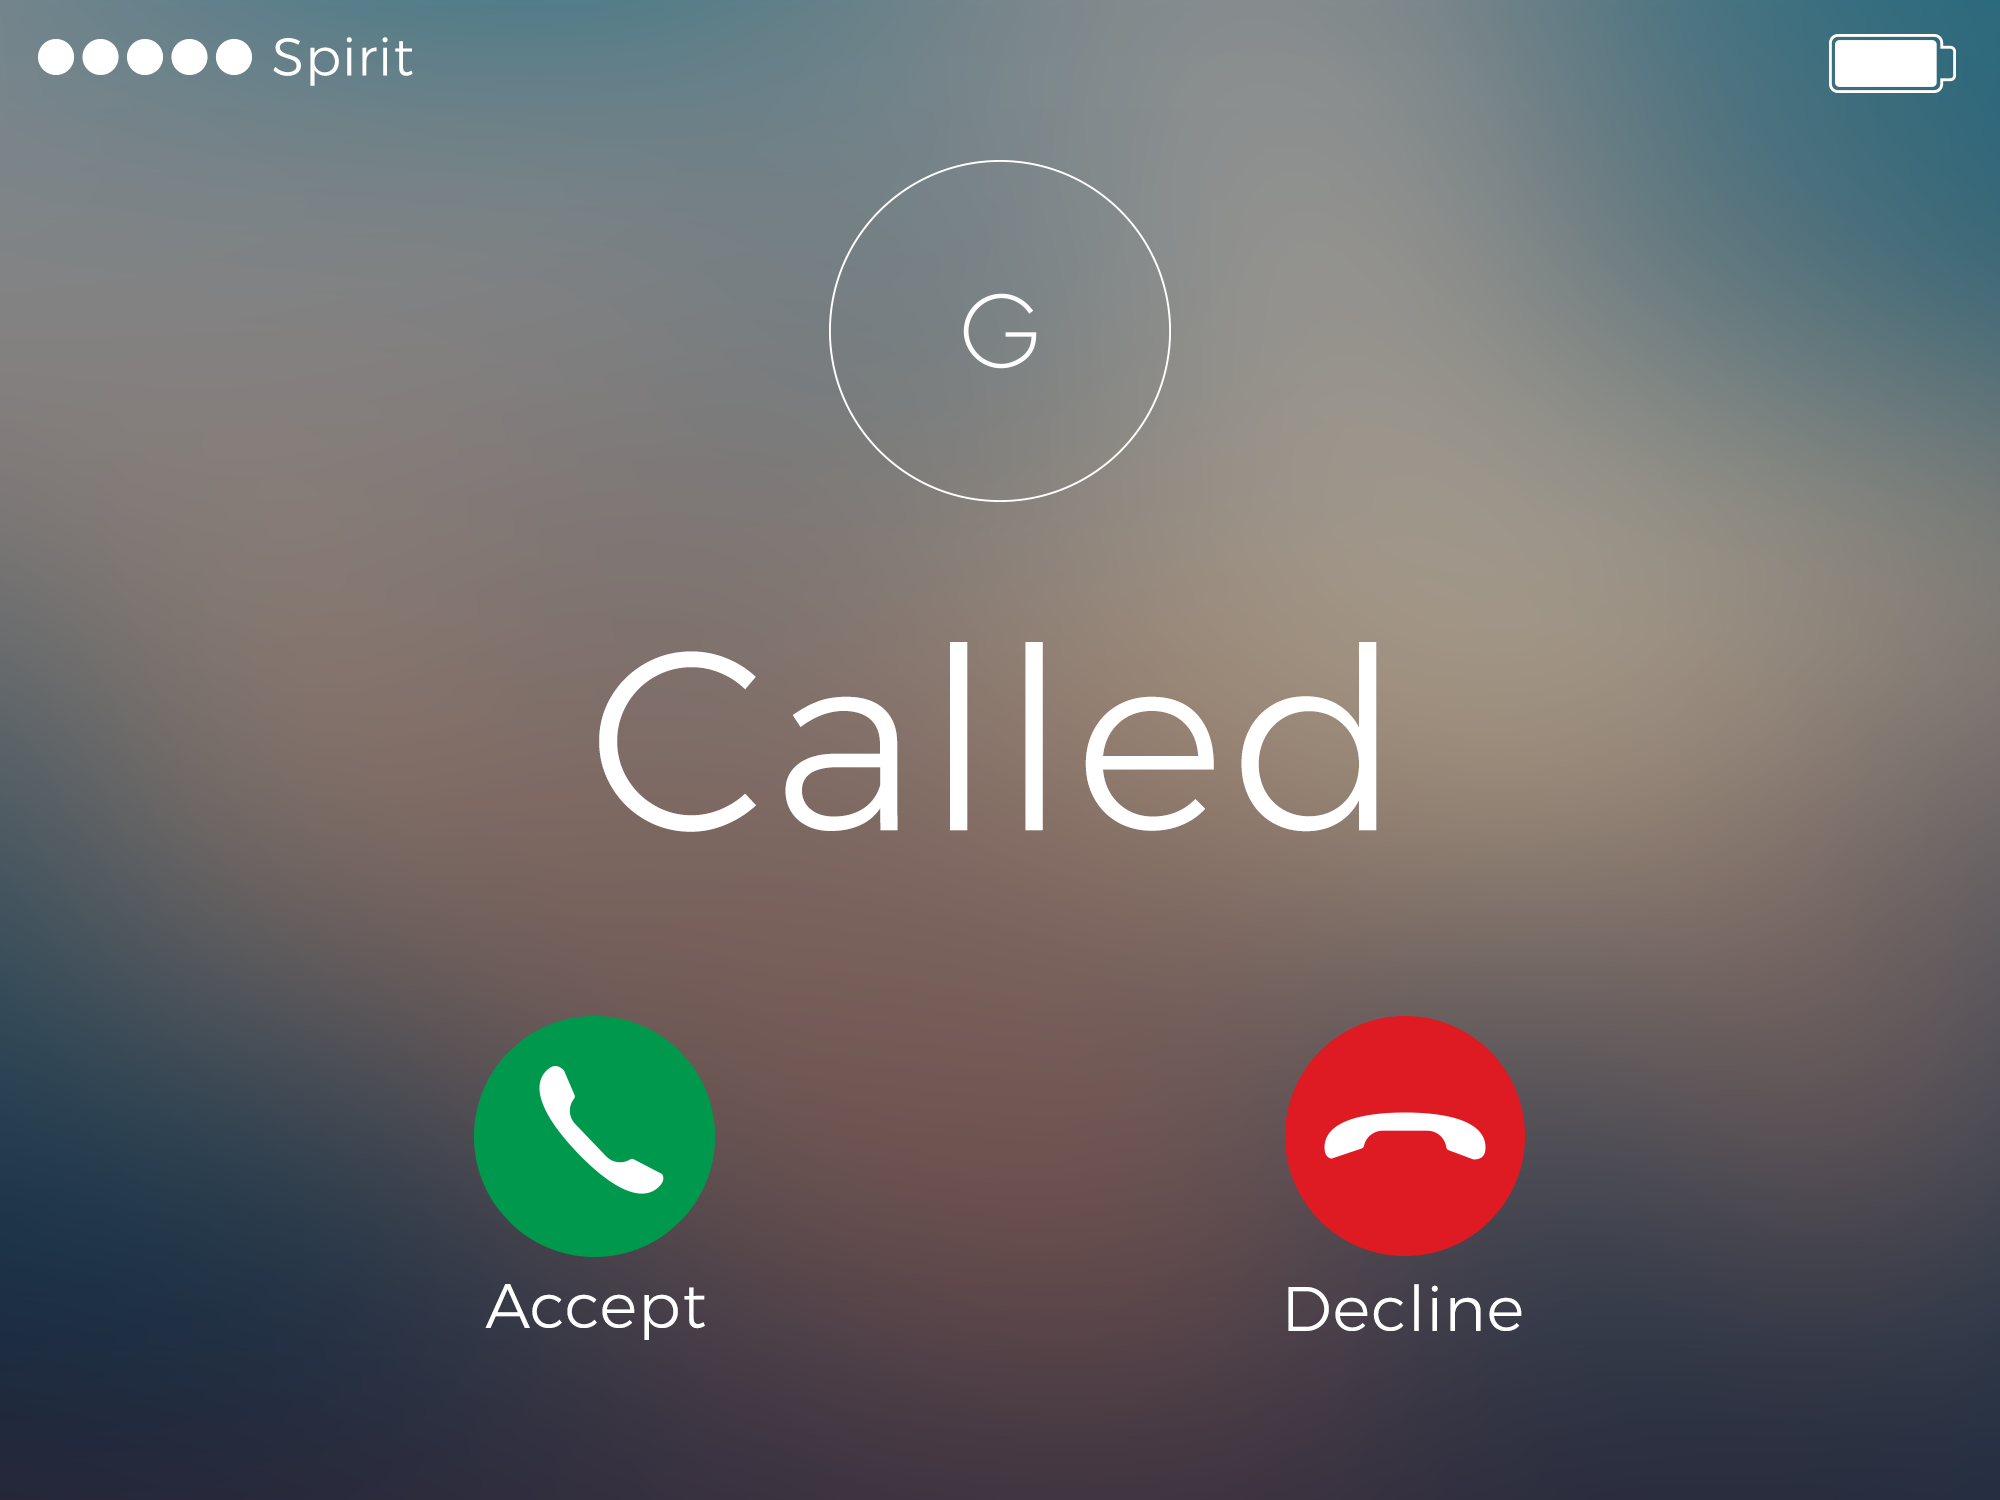 Called